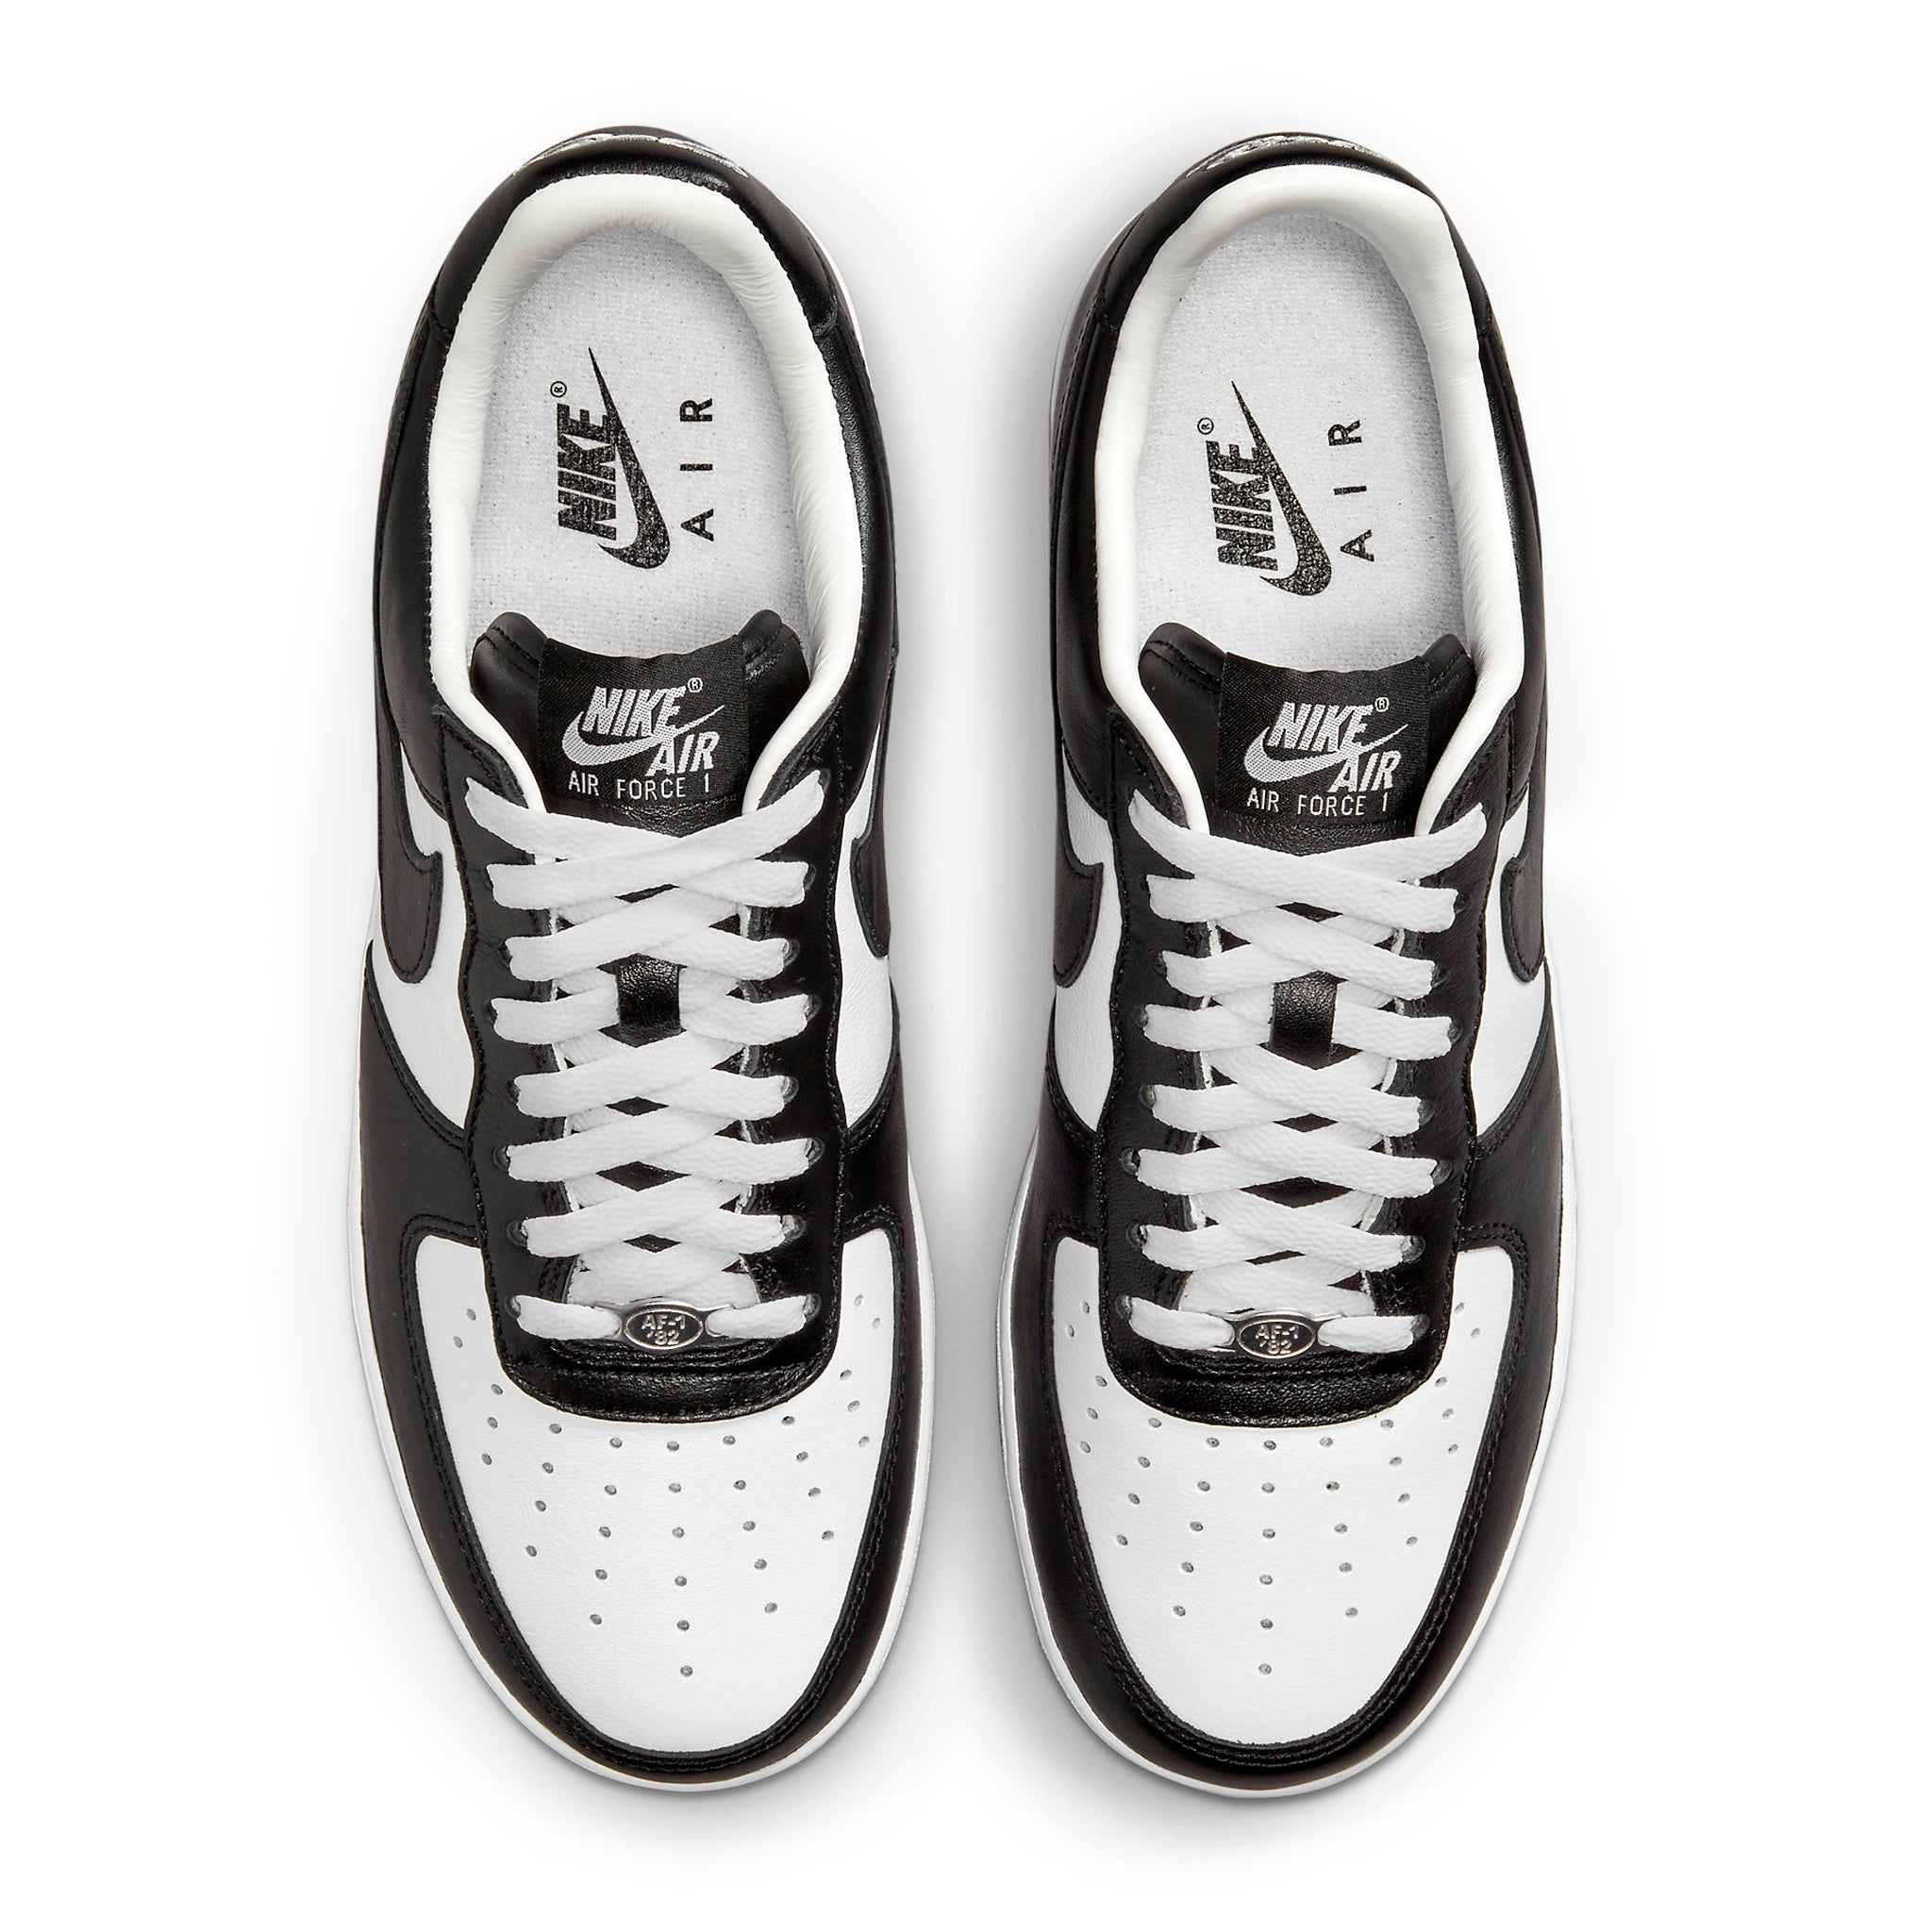 Top Down View of terror squad x nike air force 1 low white black fd7855-001